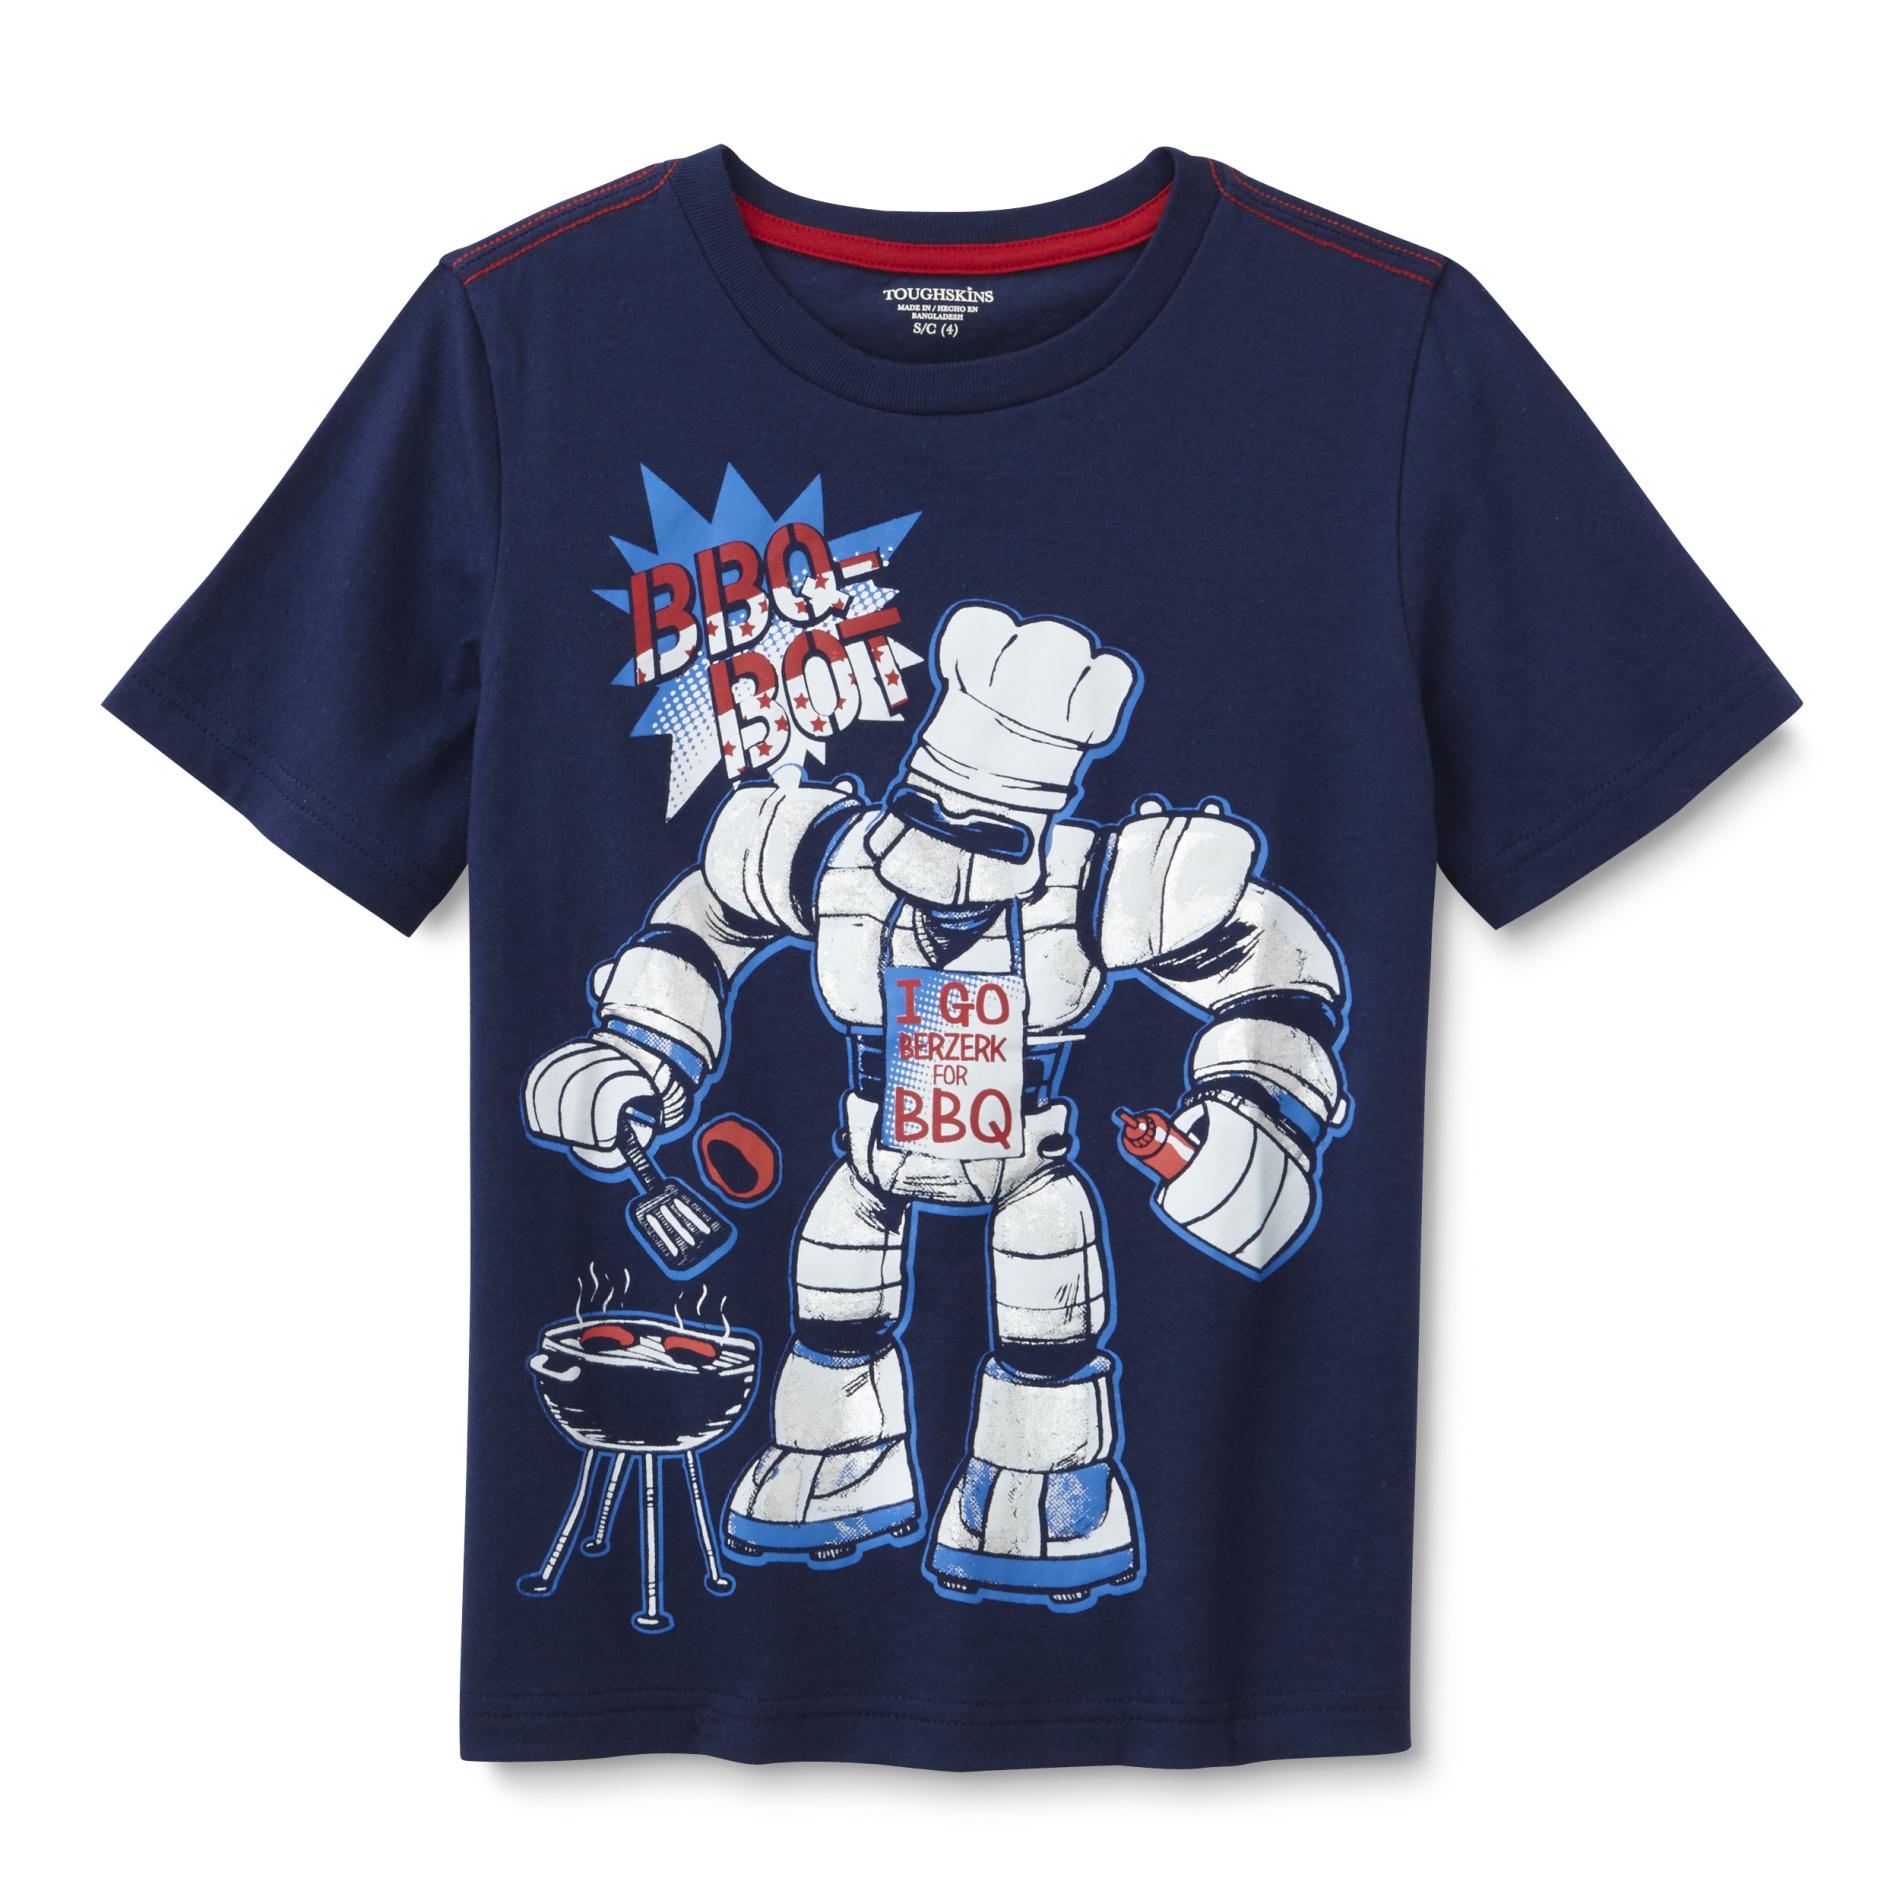 Toughskins Infant & Toddler Boy's Graphic T-Shirt - Barbecue Robot